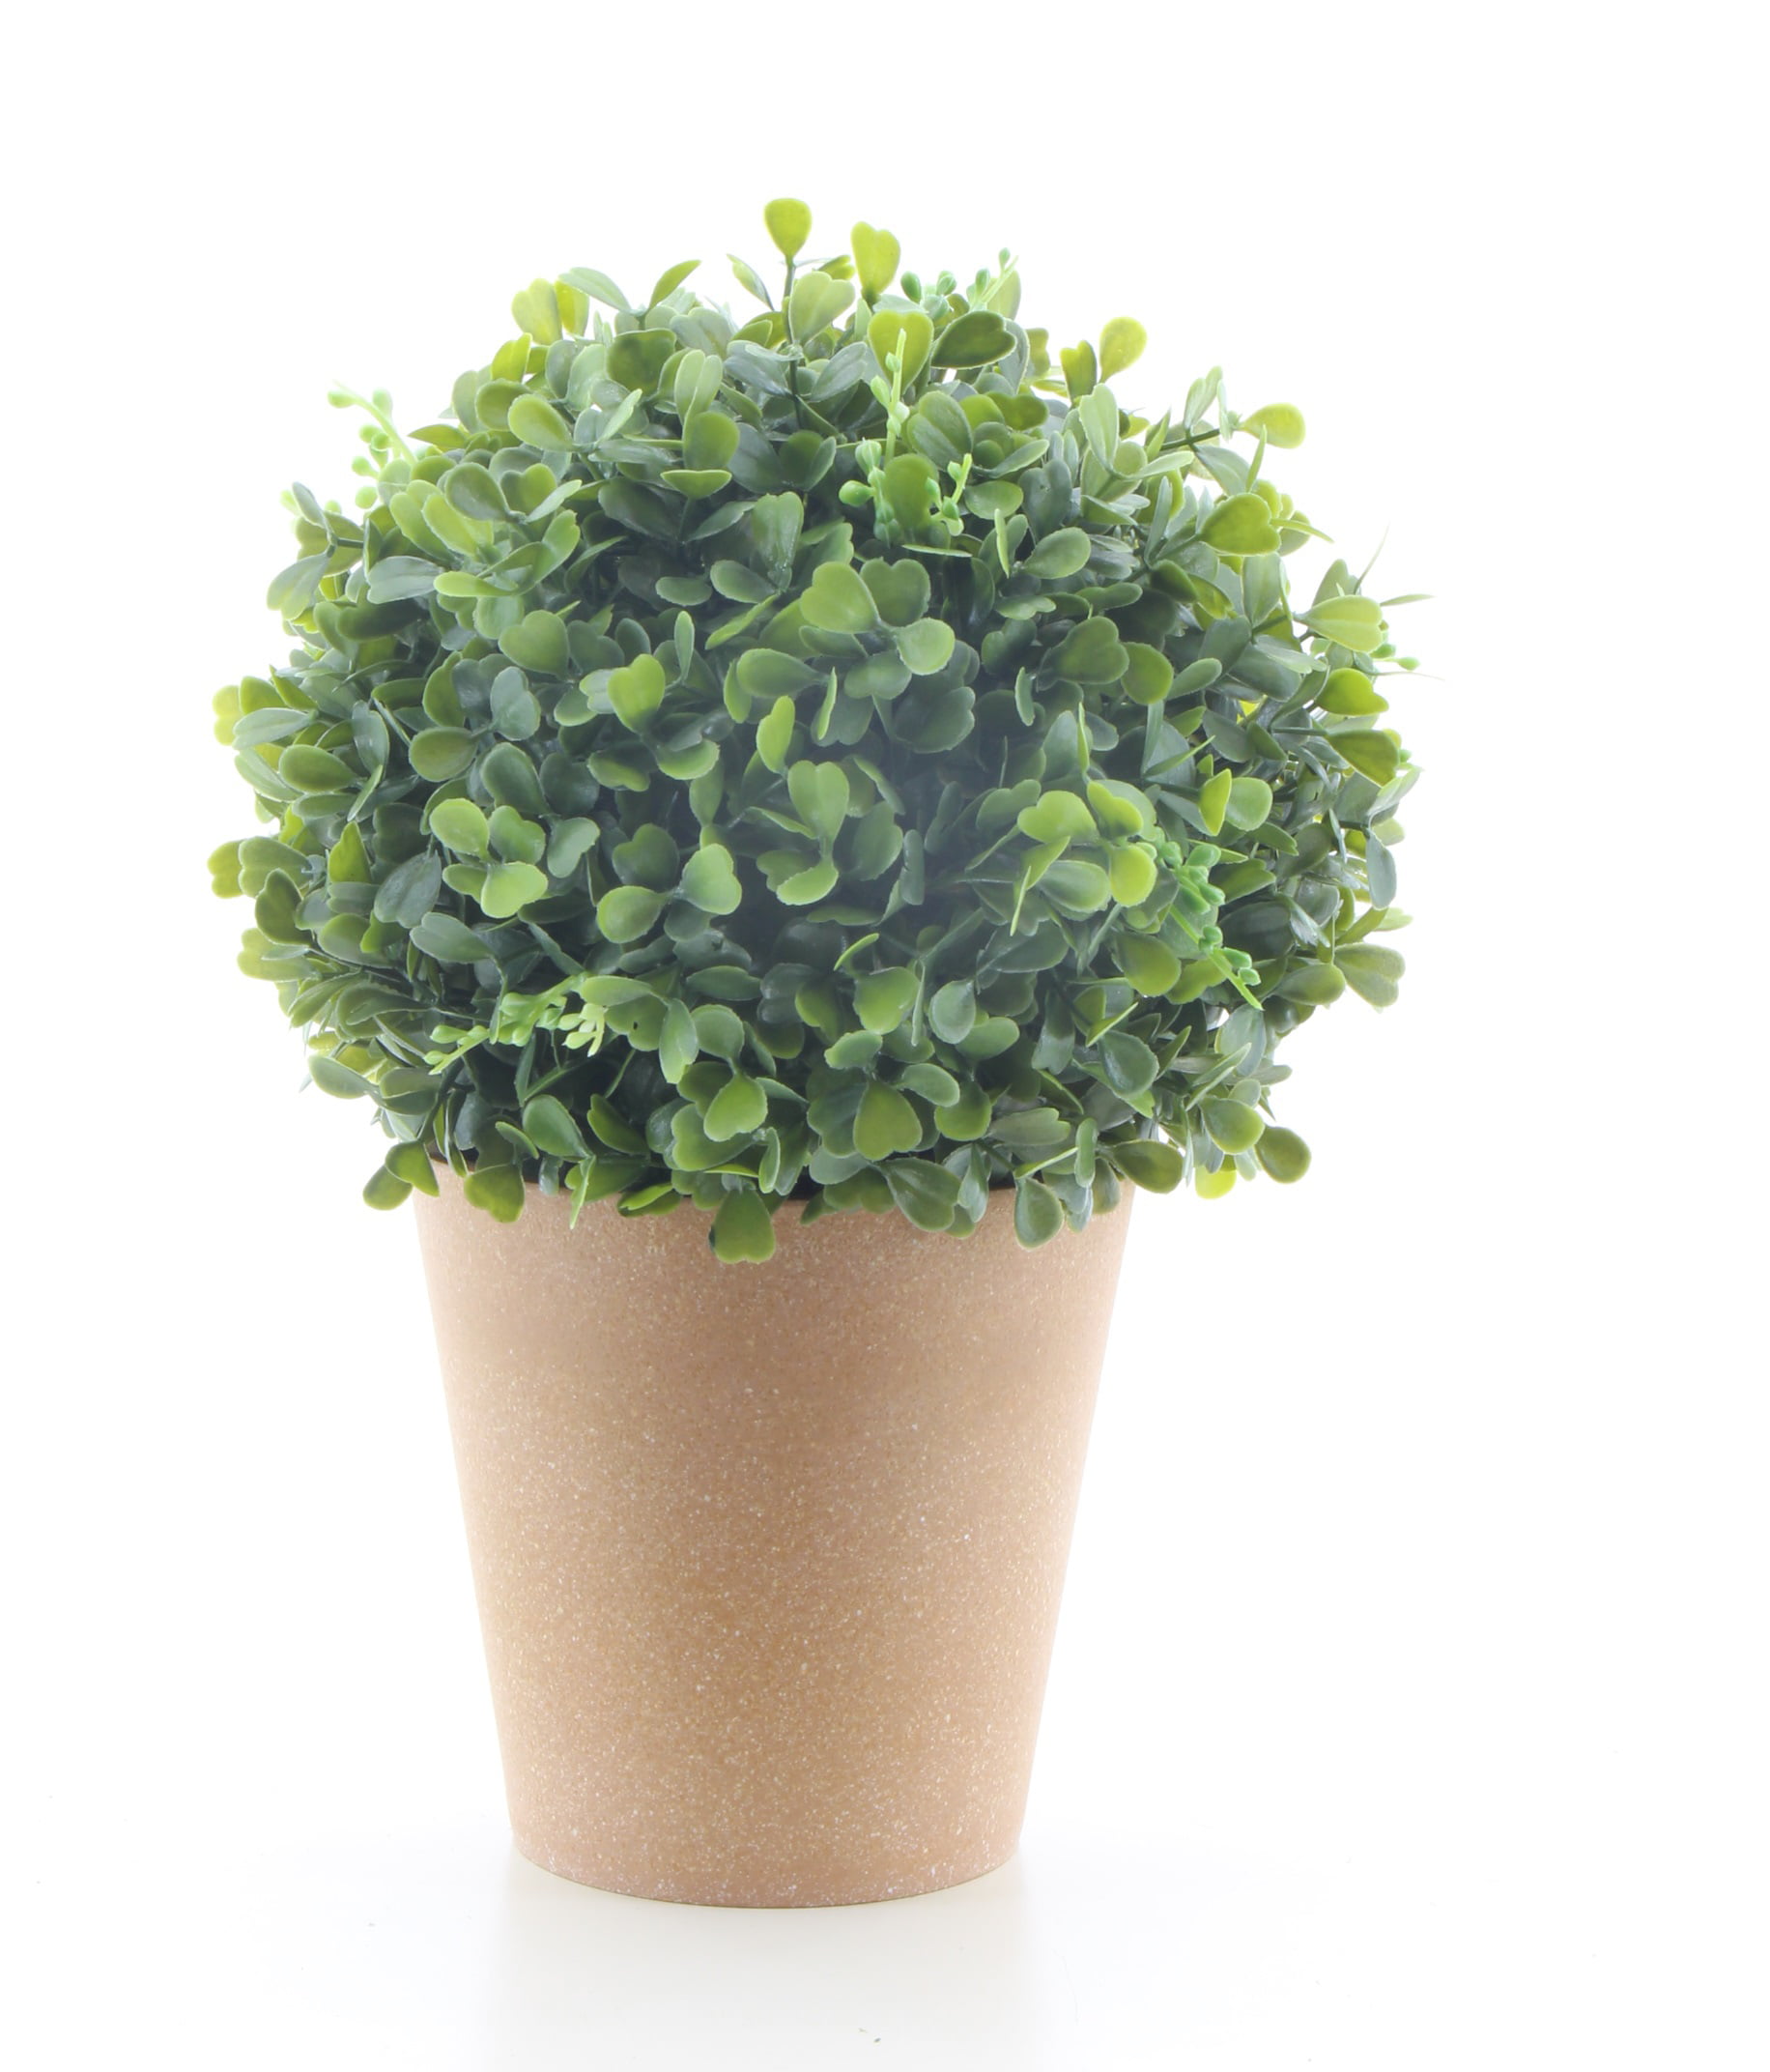 1.5 Feet Artificial Topiary Plant Balls Faux Greenery Potted Bonsai Decoration 